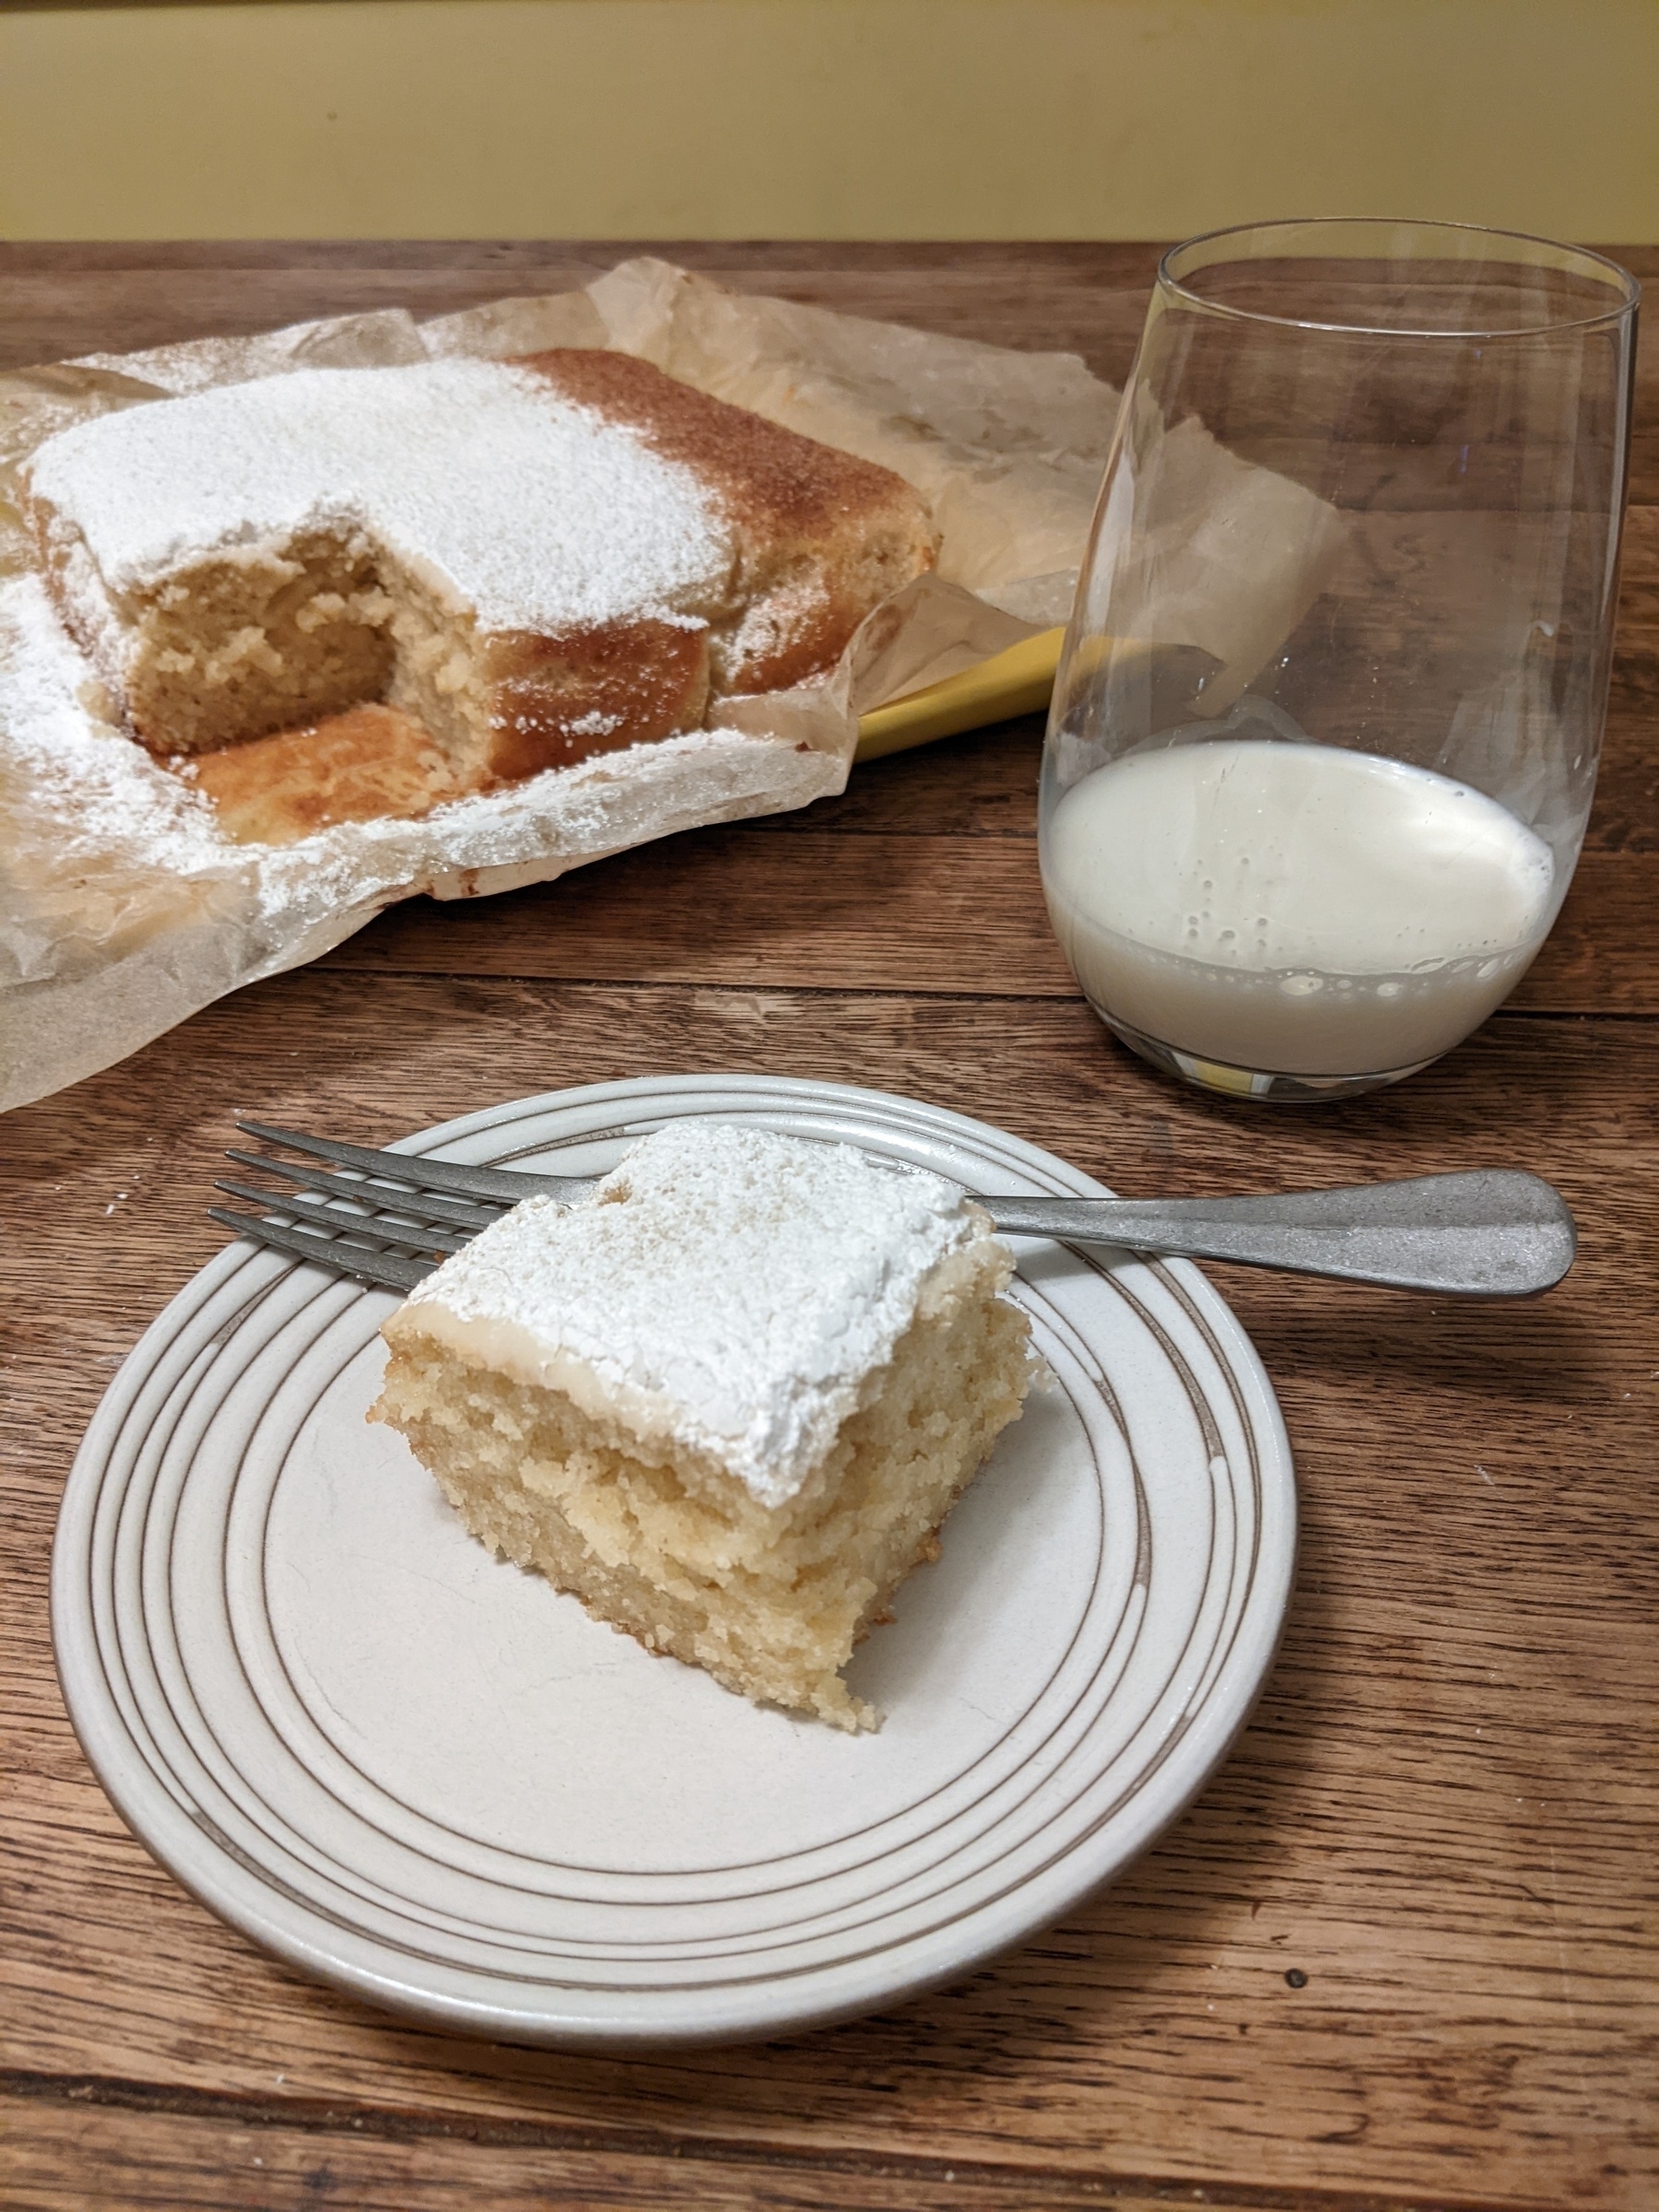 slice of yellow cake with powdered sugar topping beside square cake 